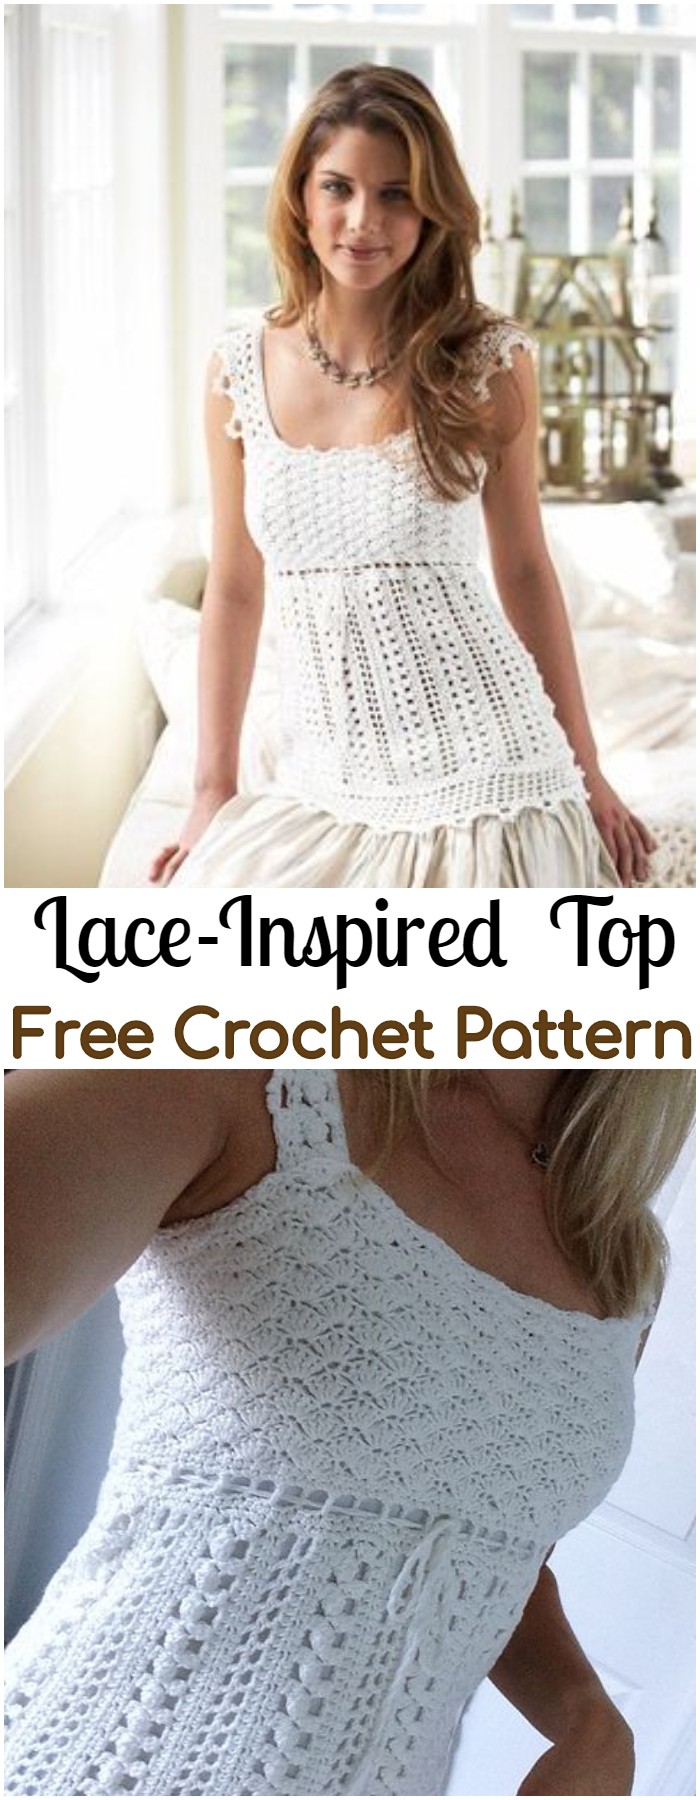 Lace-Inspired Crocheted Top